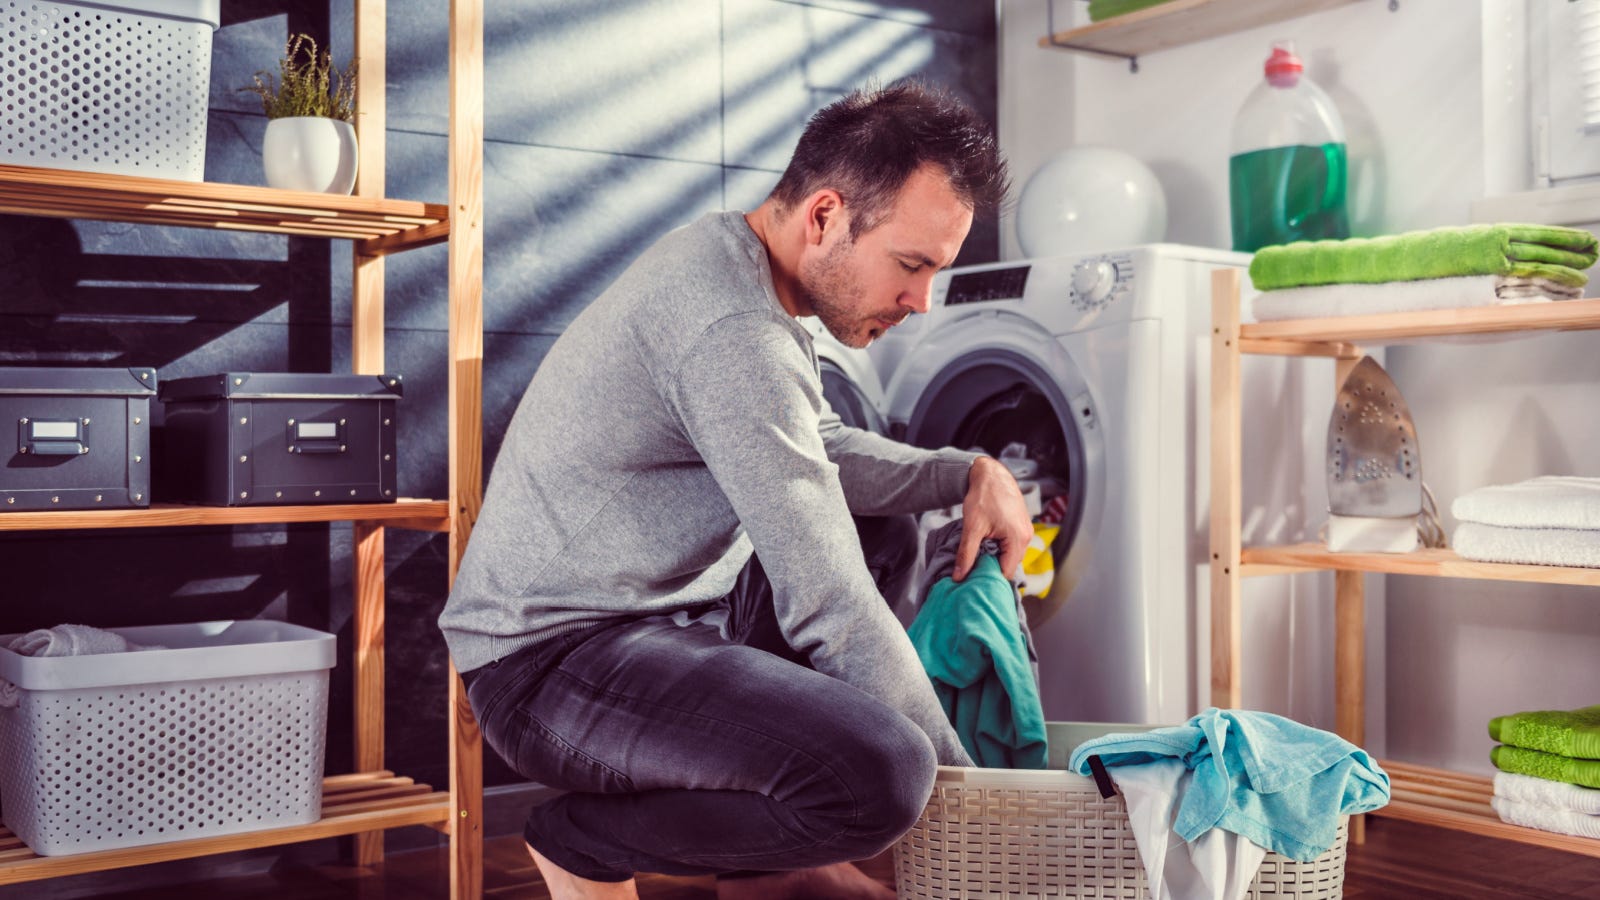 Why You Should Stop Doing Laundry in Hot Water